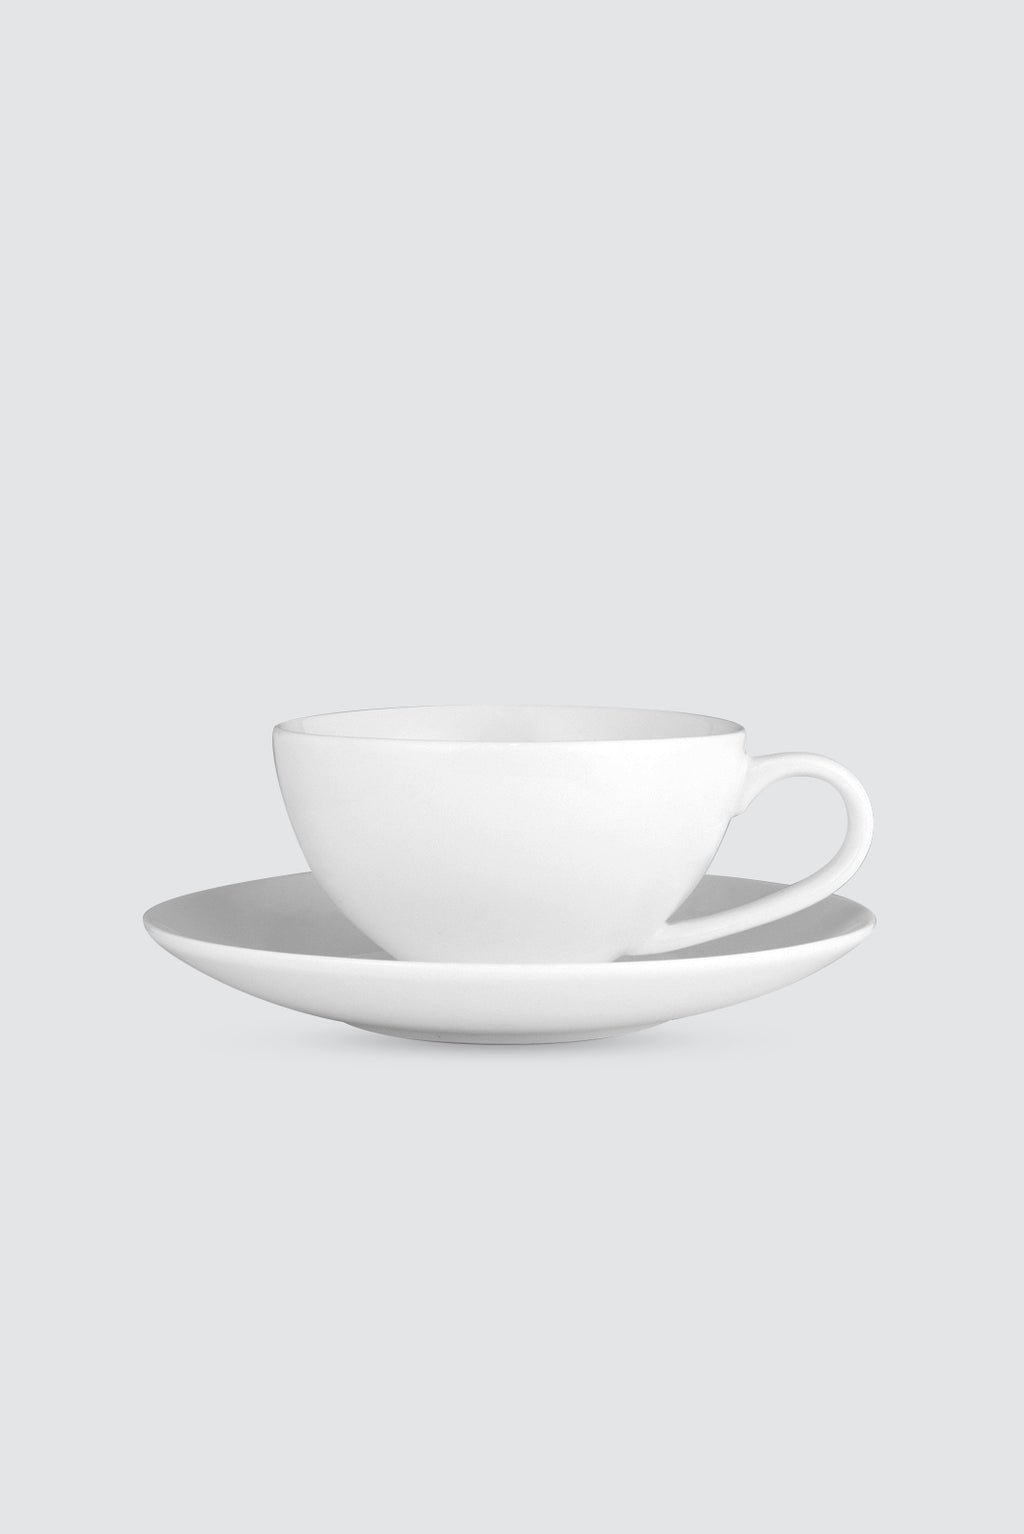 Wilkie Brothers Coupe Cup & Saucer 250ml